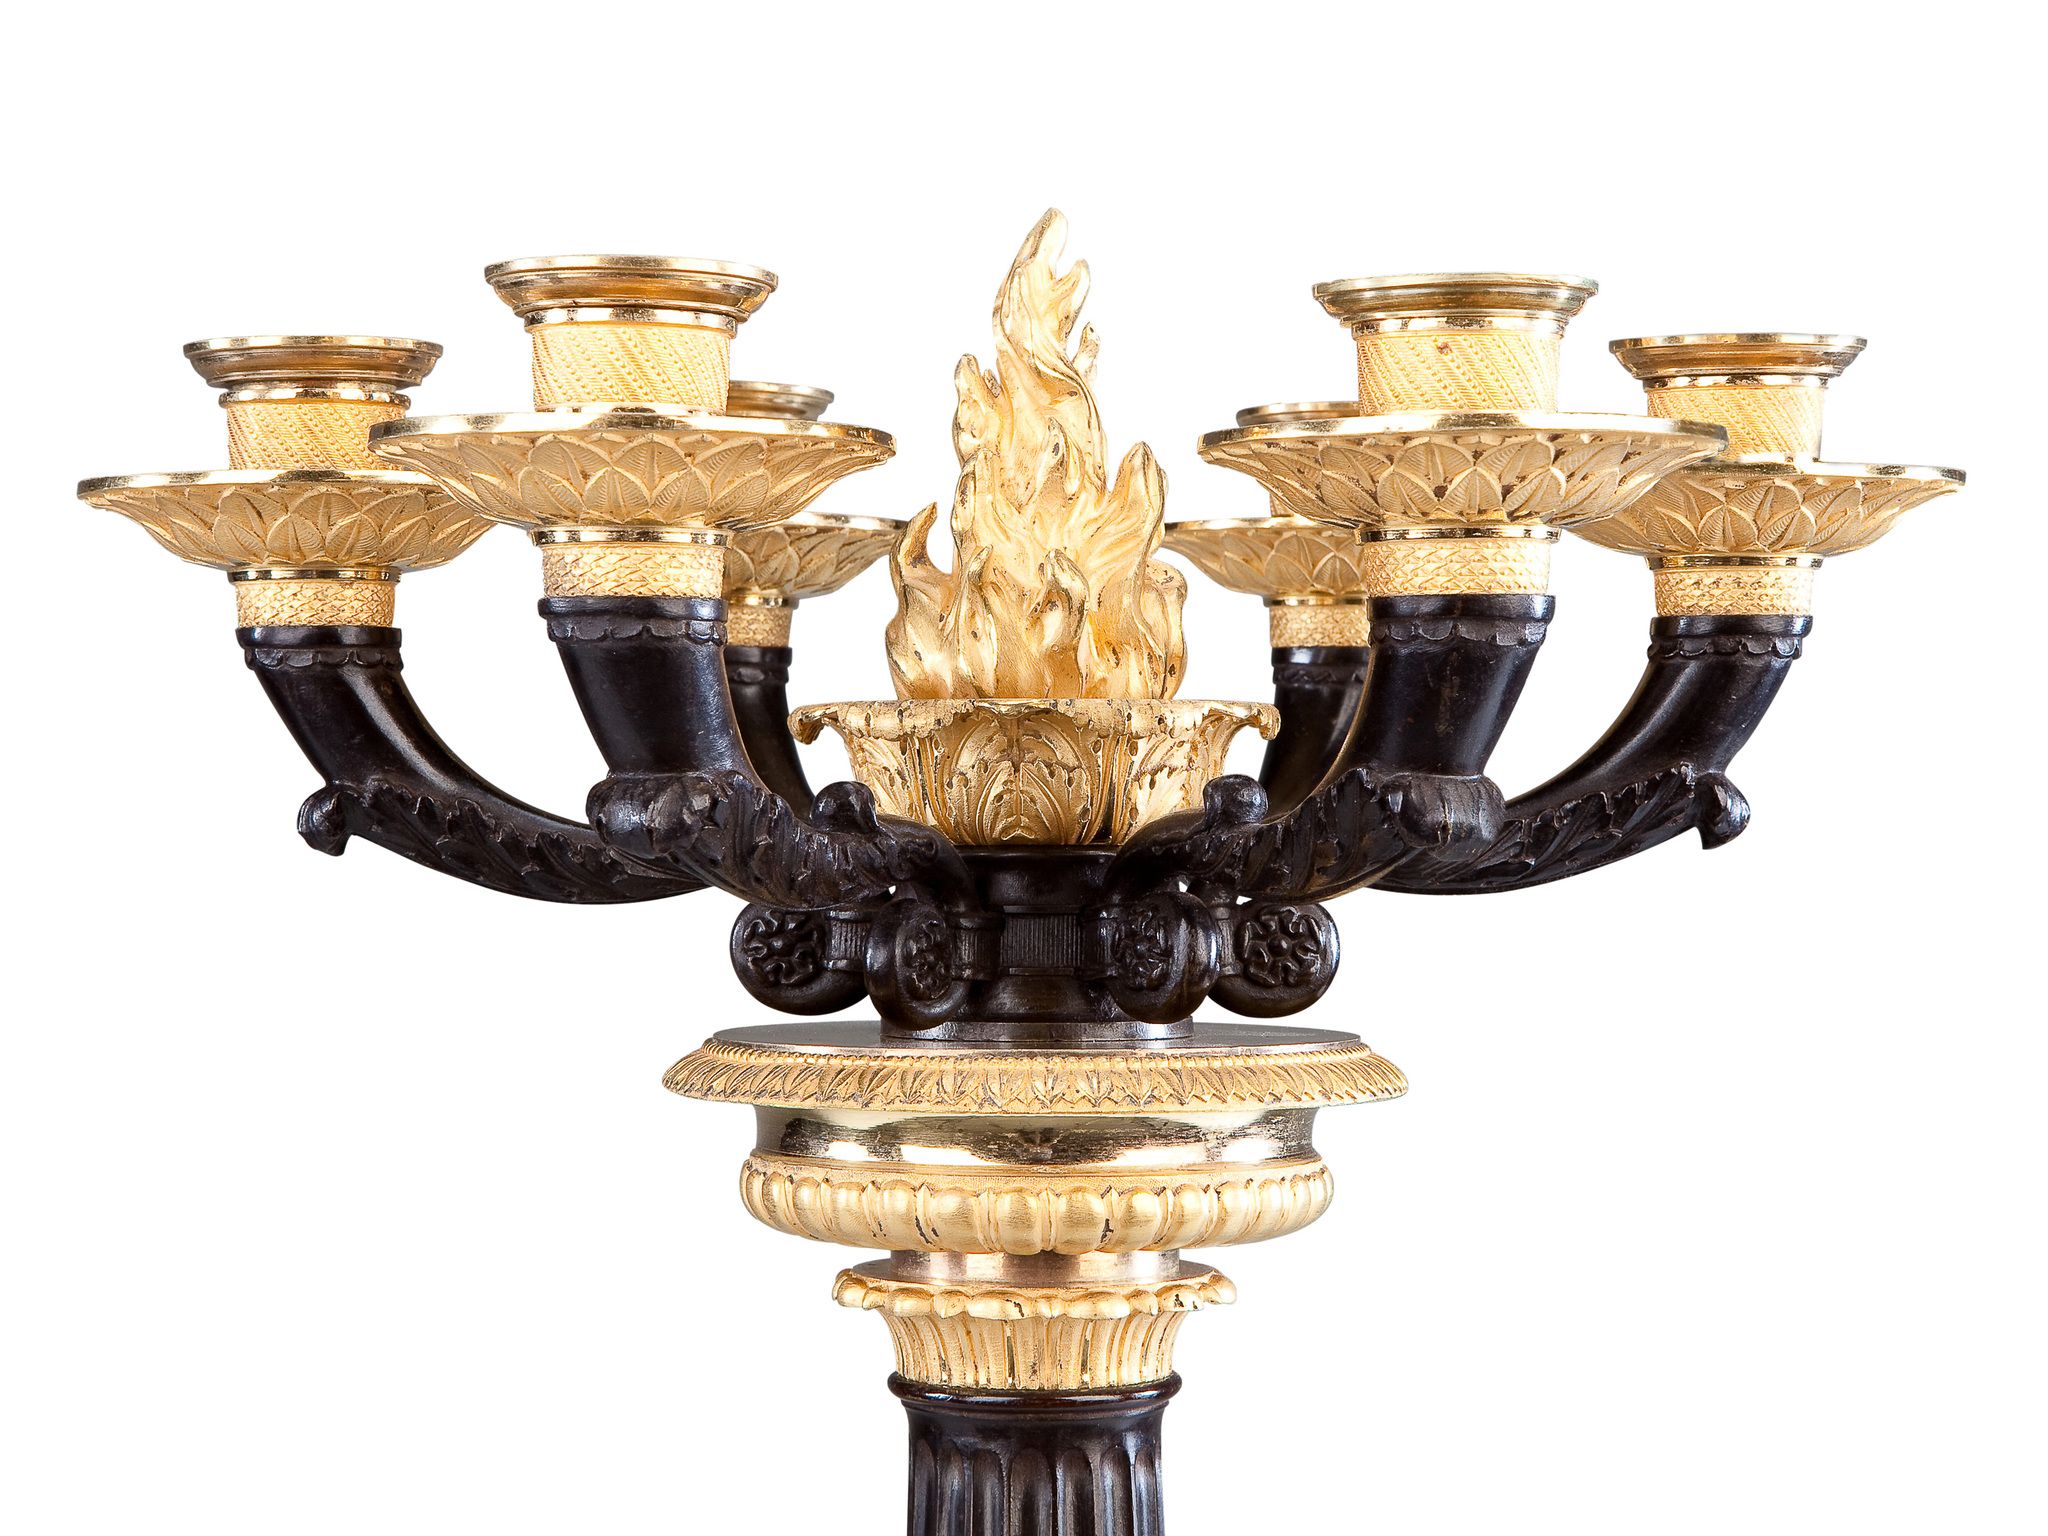 A Pair of Empire Period Marble and Ormolu Candelabra France circa 1810, each taking the form of a